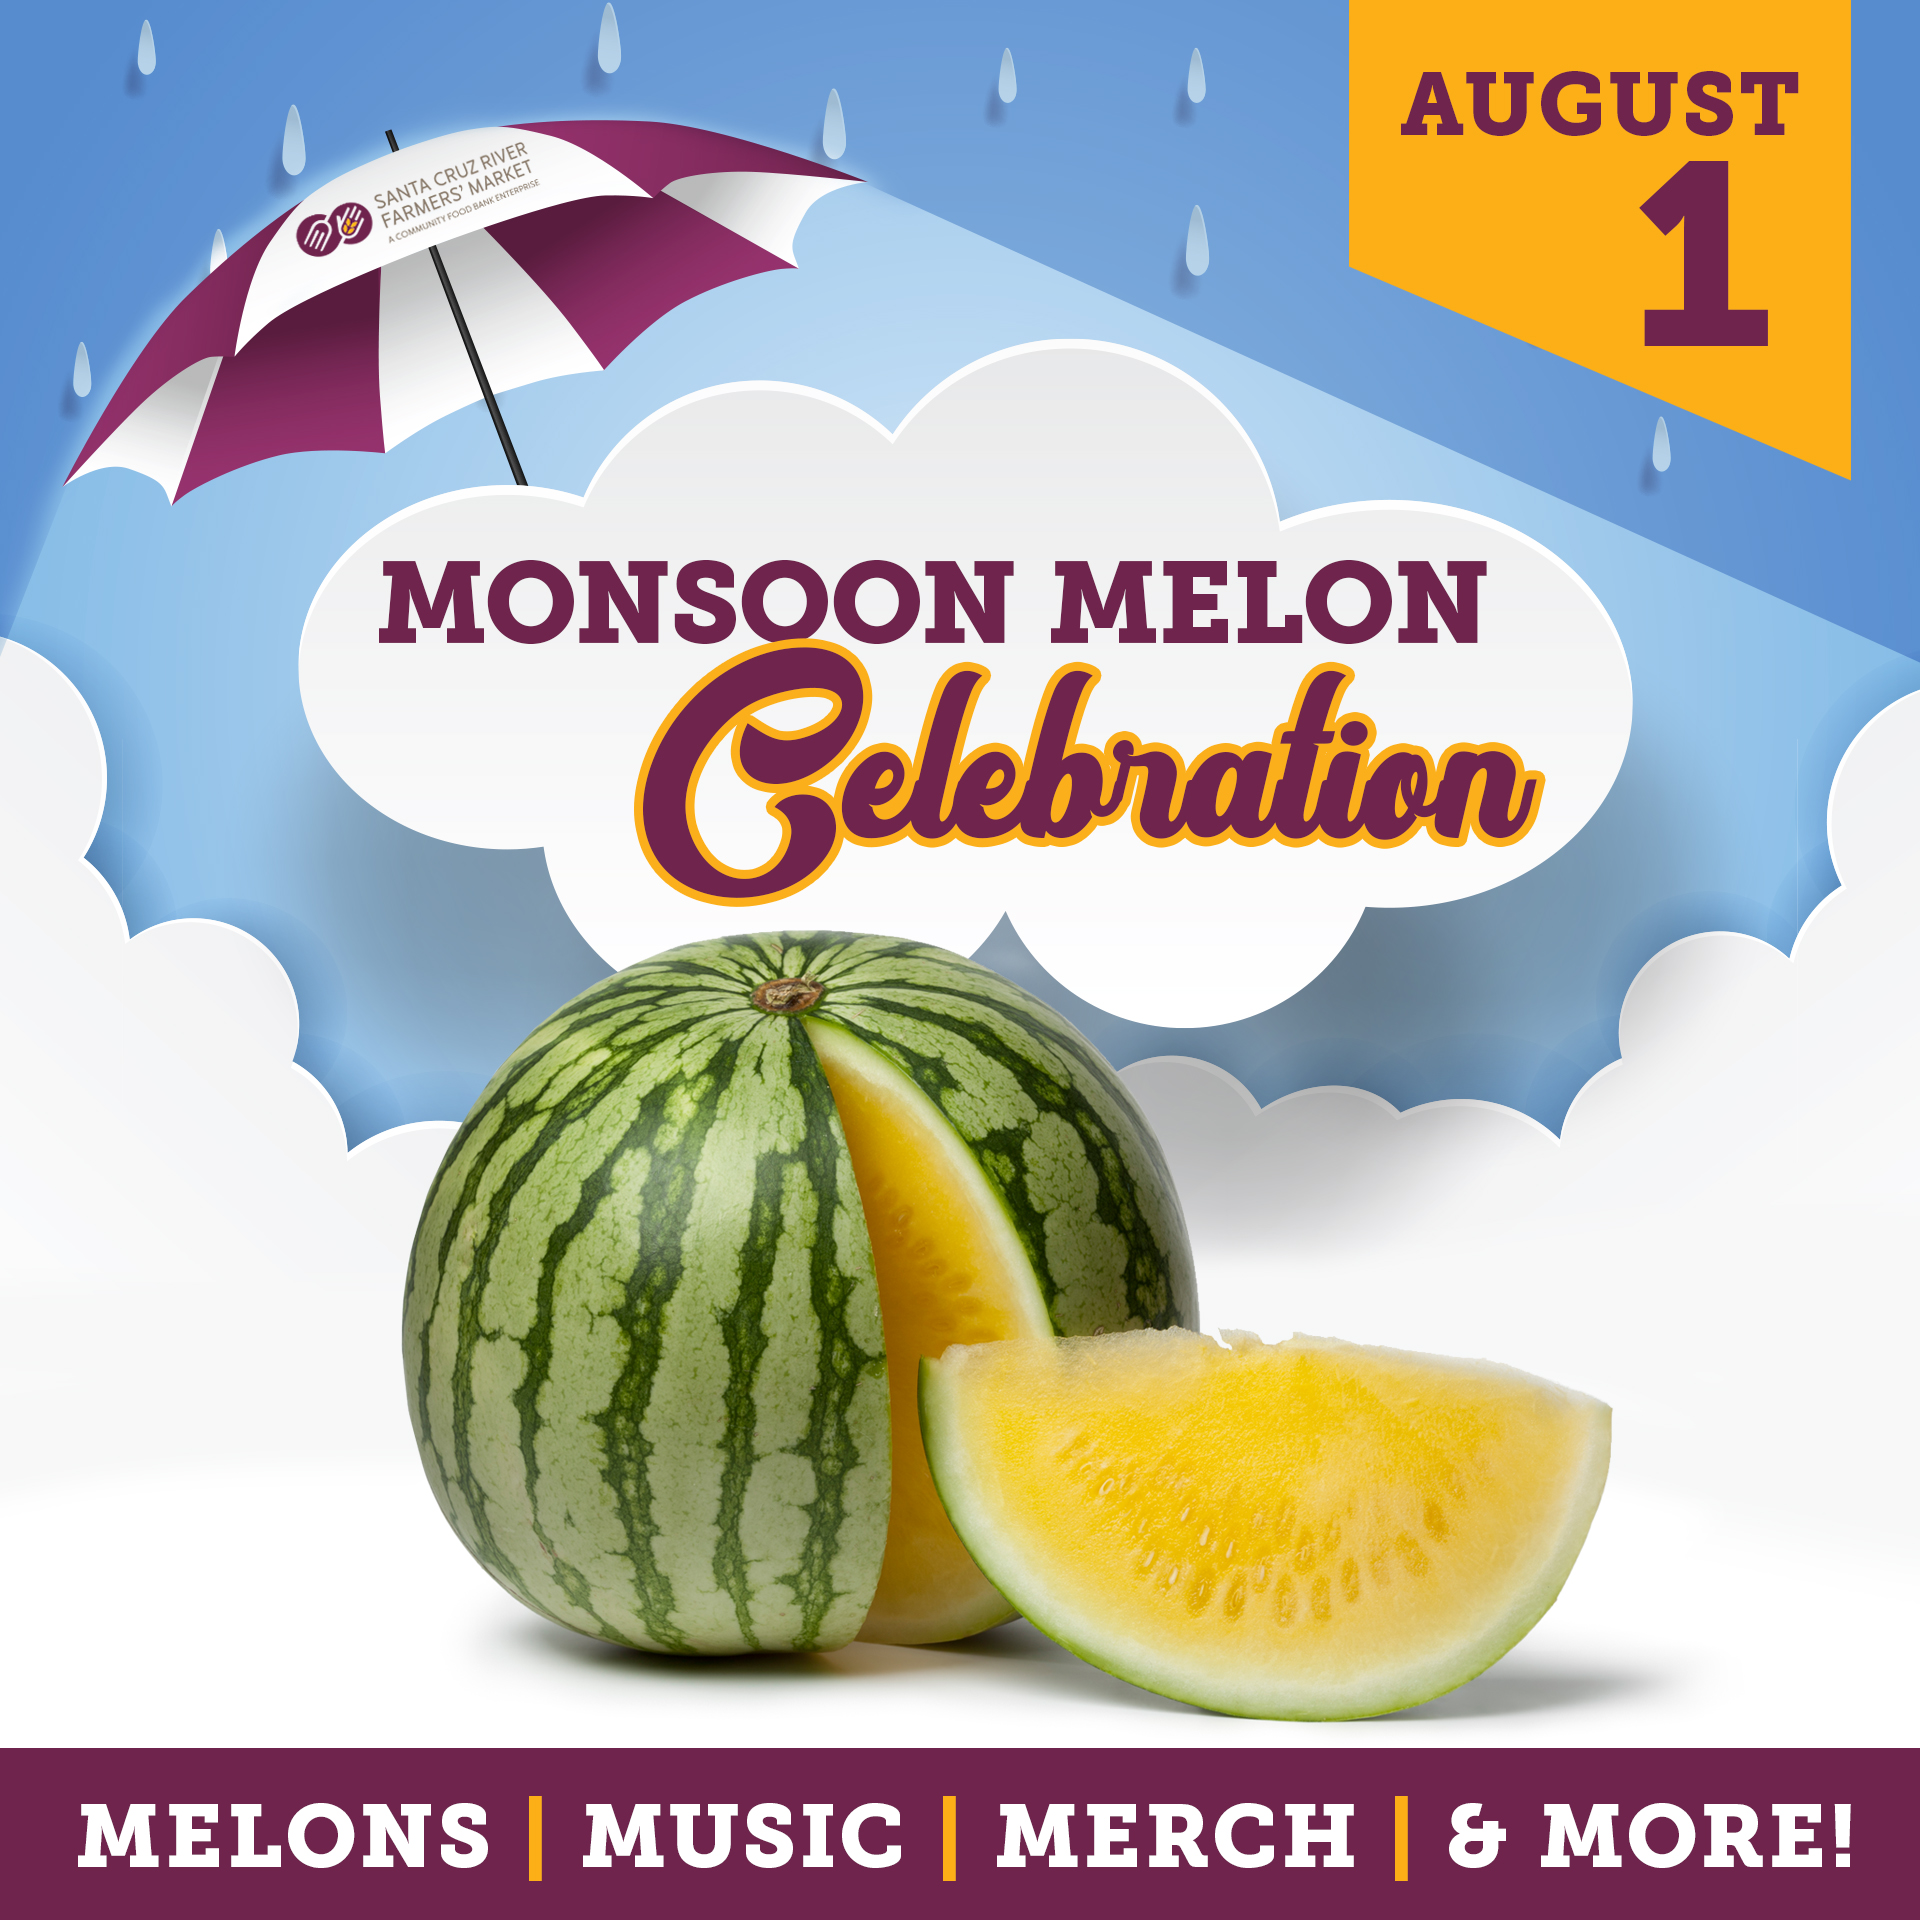 Monsoon melon celebration graphic of a yellow watermelon with a slice cut out.